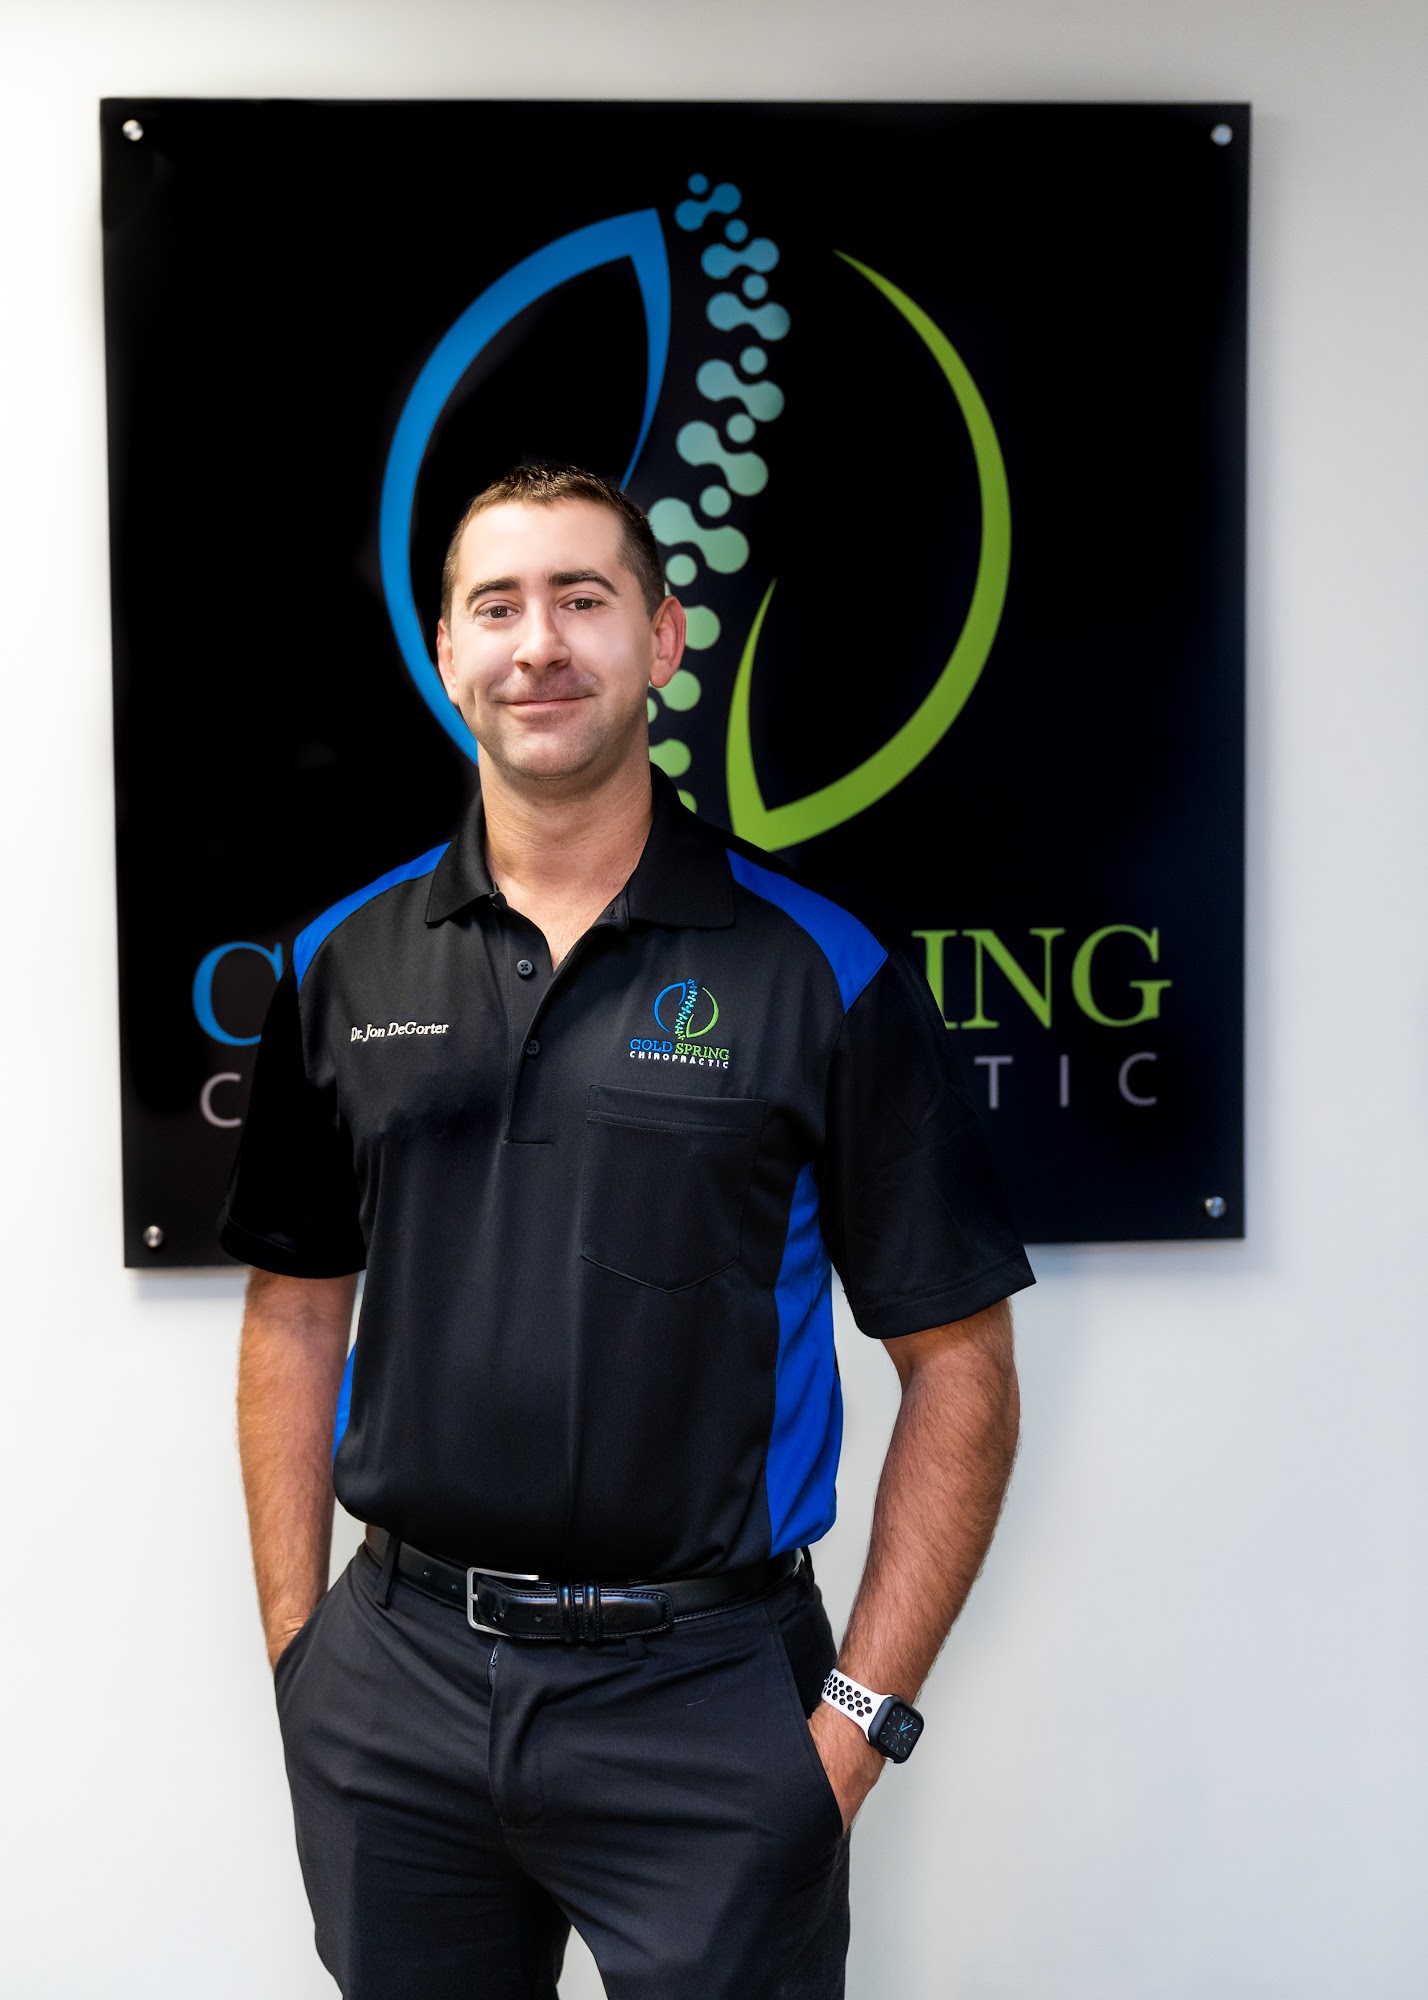 Cold Spring Chiropractic